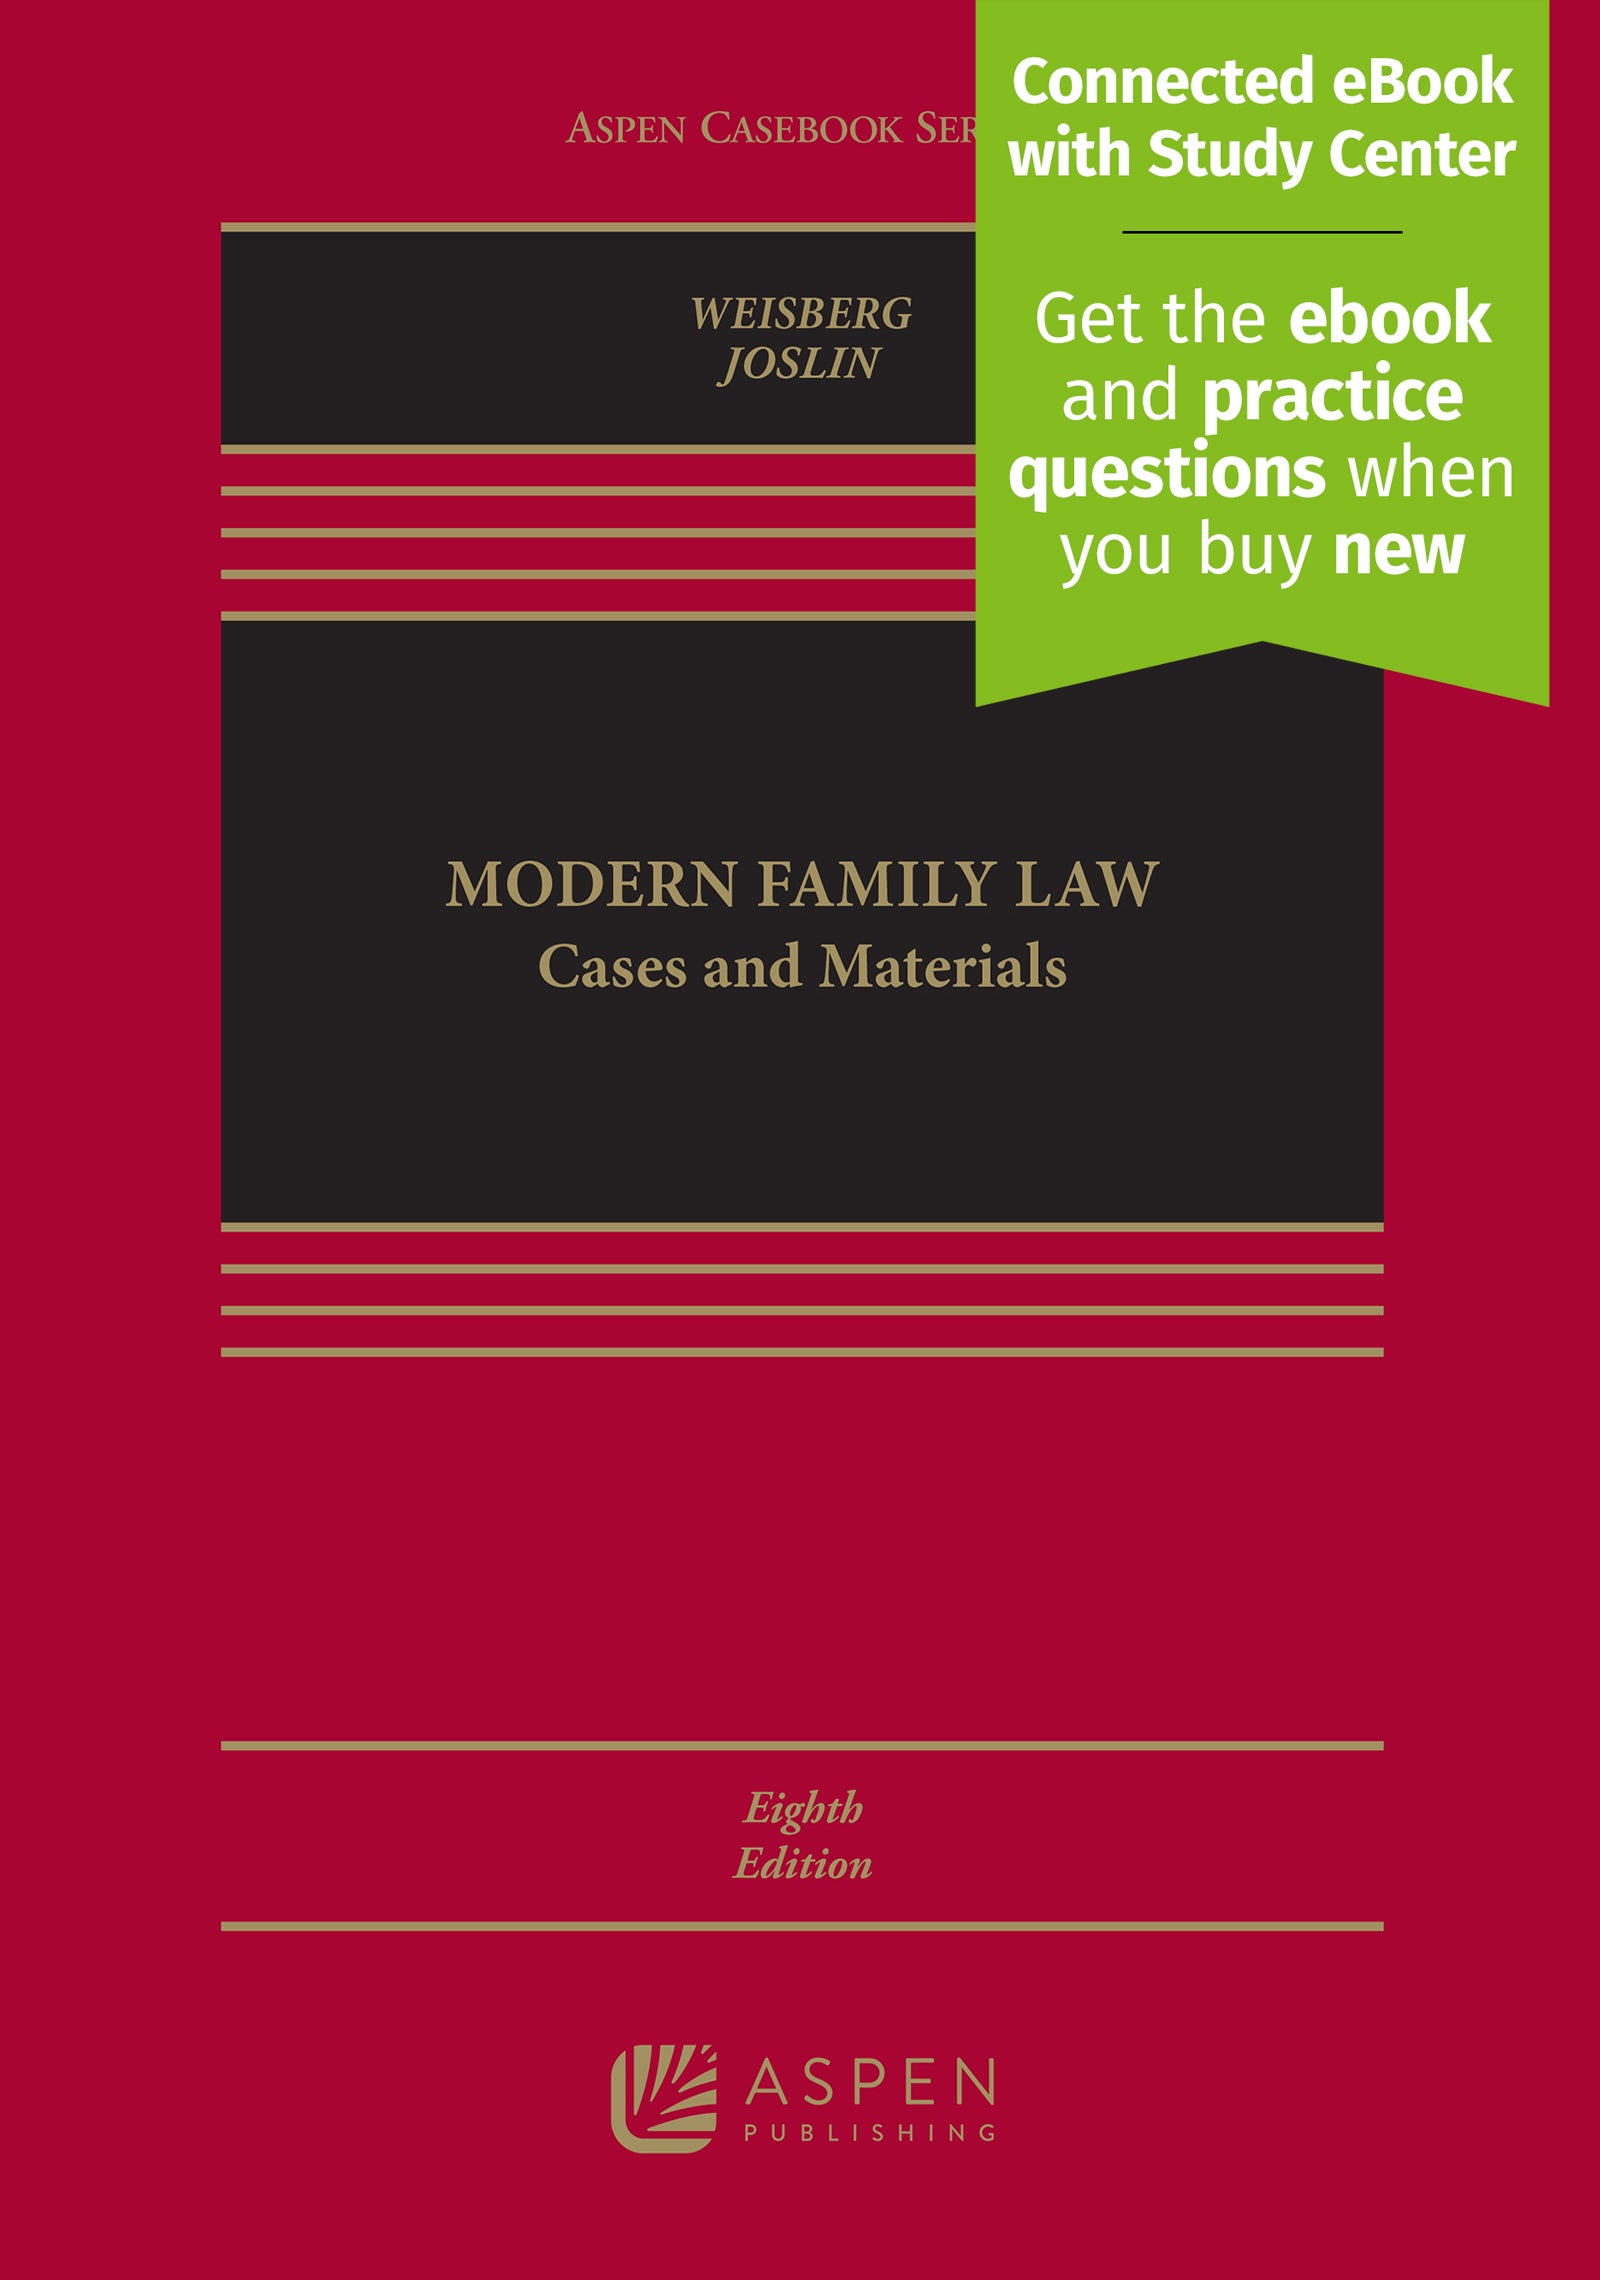 Modern Family Law: Cases and Materials, Eighth Edition